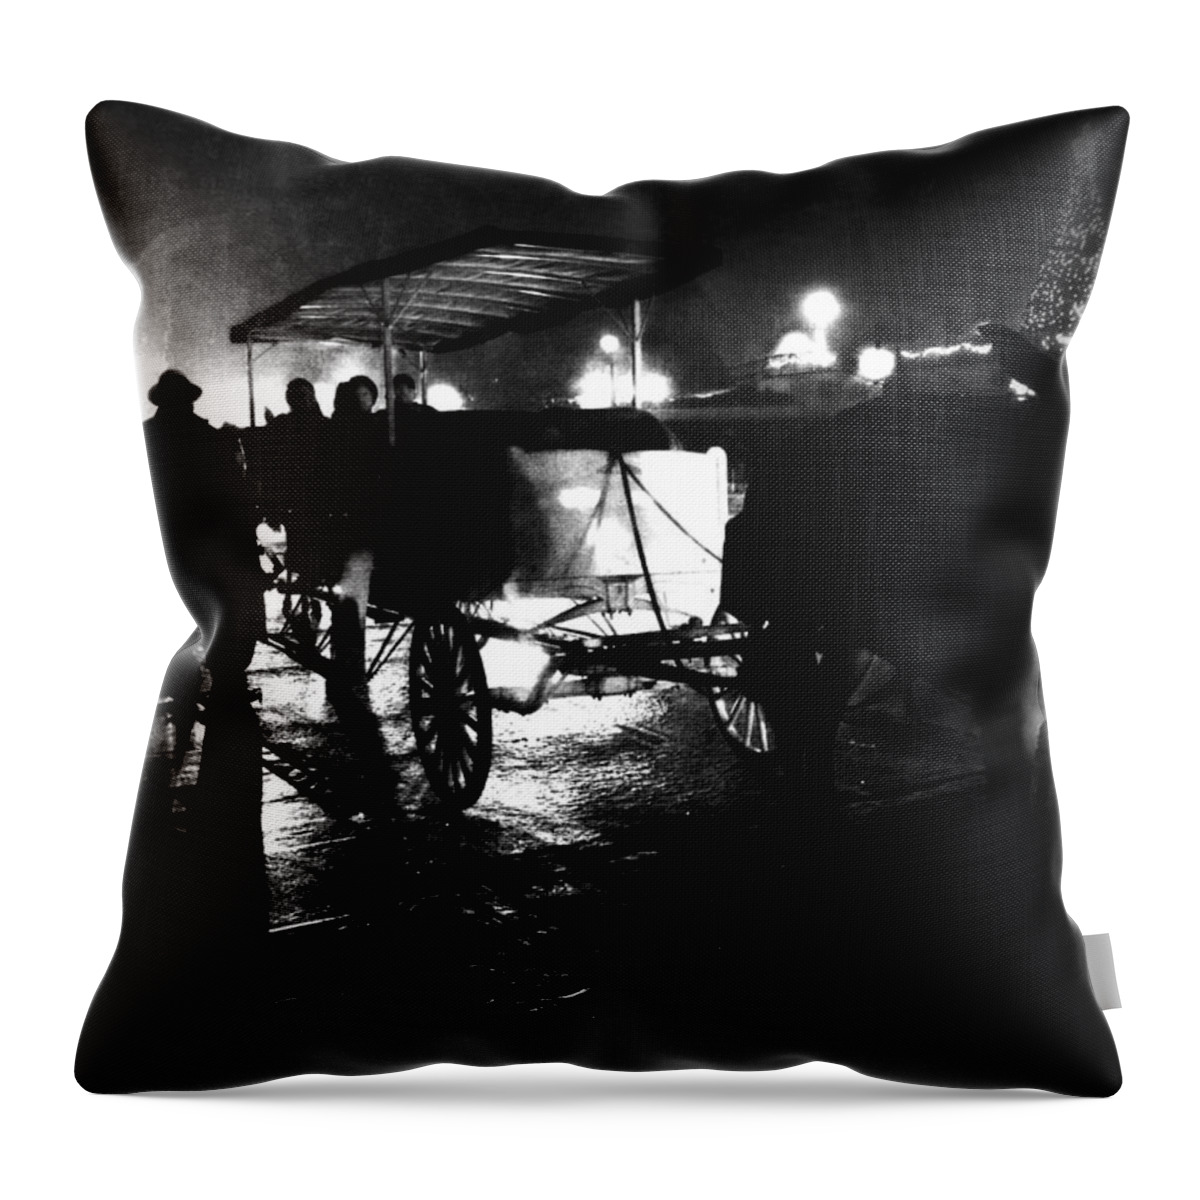 My Ride Throw Pillow featuring the photograph My Ride by Amzie Adams